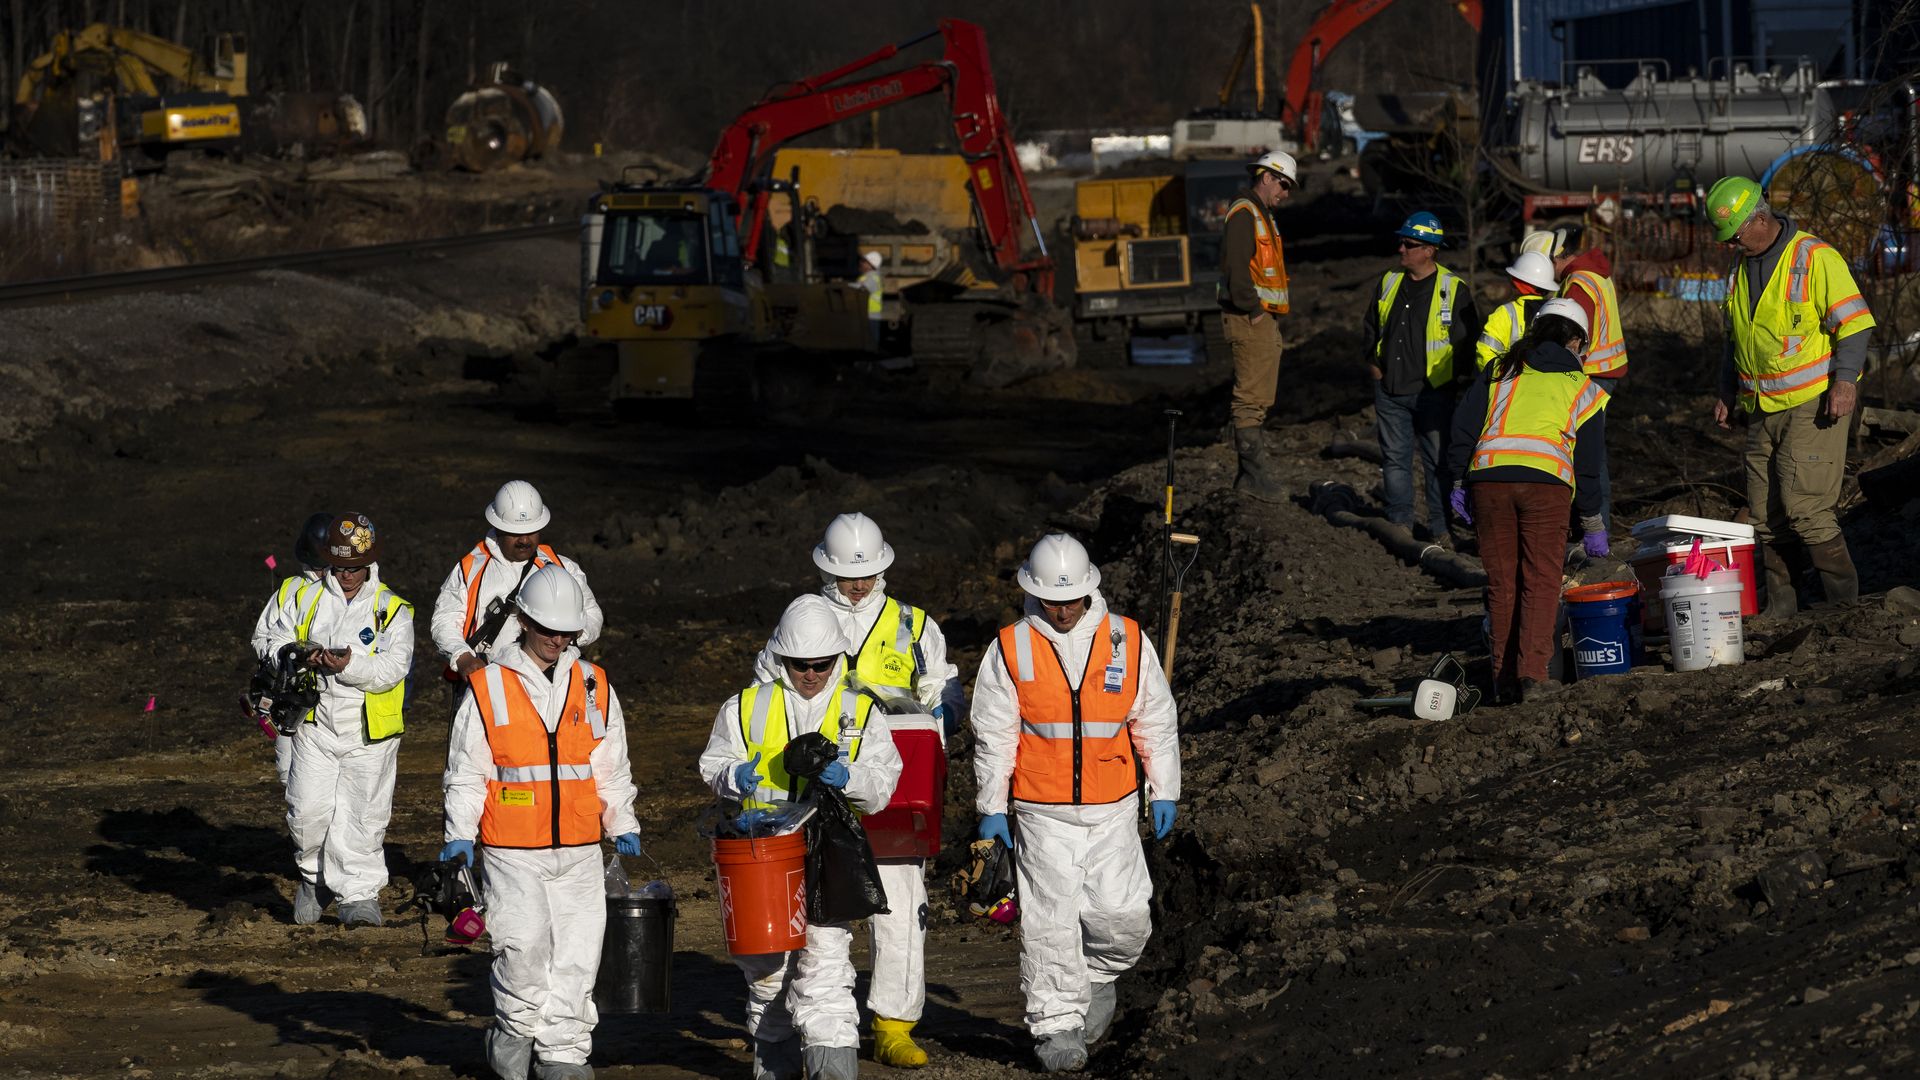 Members of the Ohio EPA and U.S. EPA  collect soil and air samples from the train derailment site in in East Palestine, Ohio, on March 9.